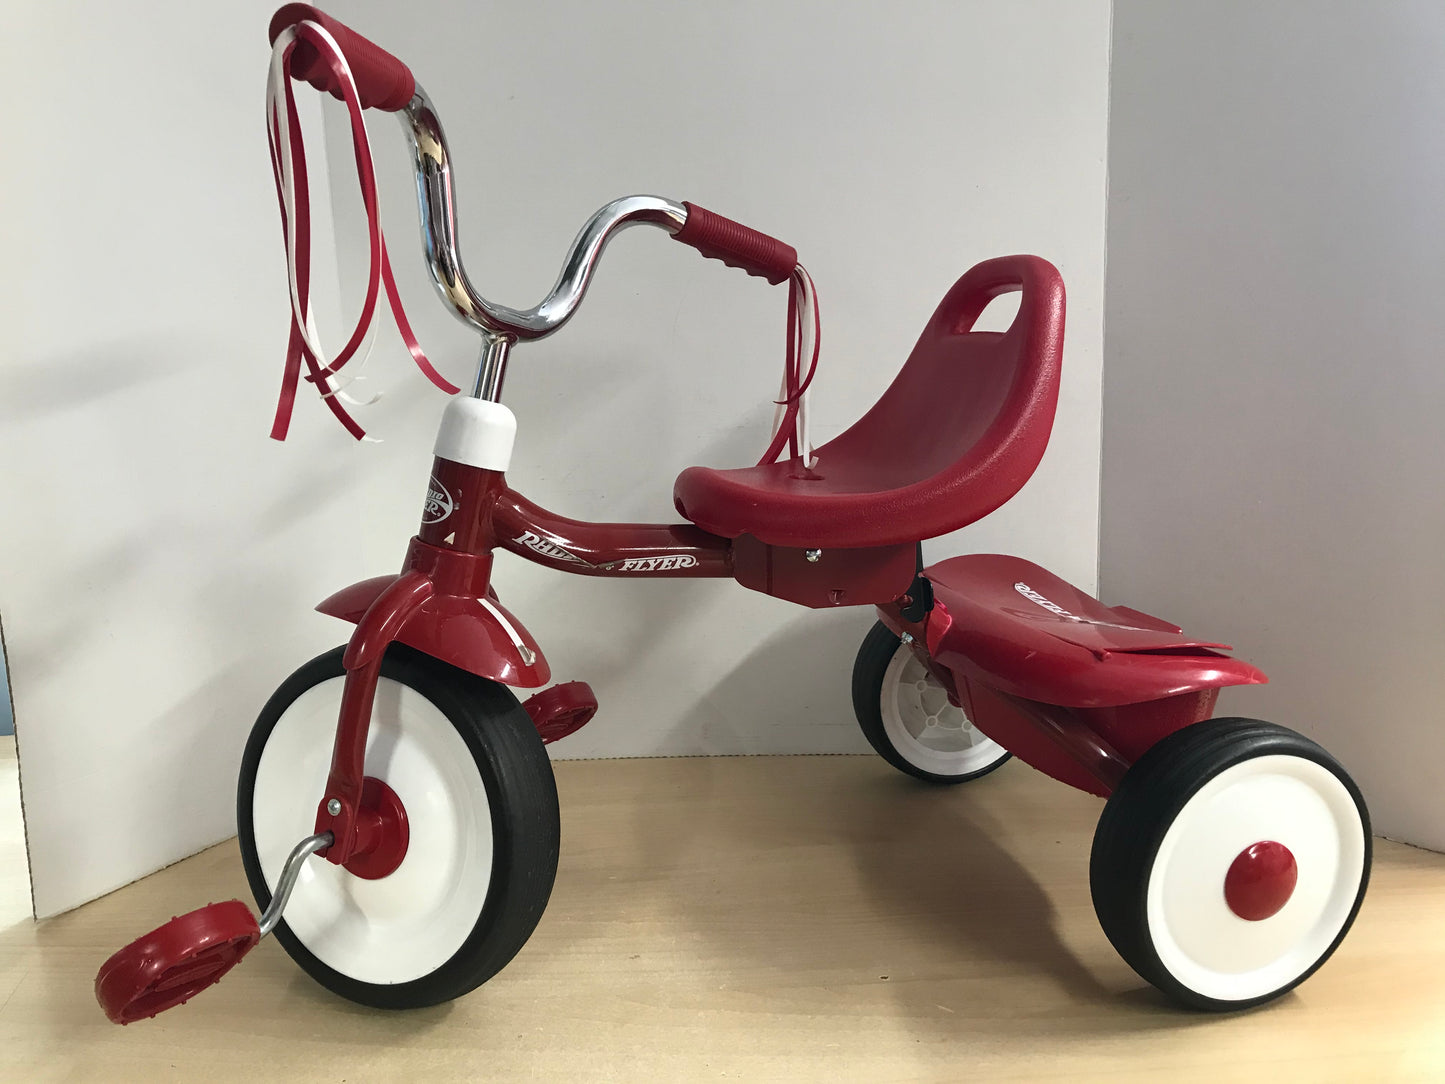 Trike Radio Flyer My First Ridem Red Metal With Basket On Back Excellent As New Age 1-3